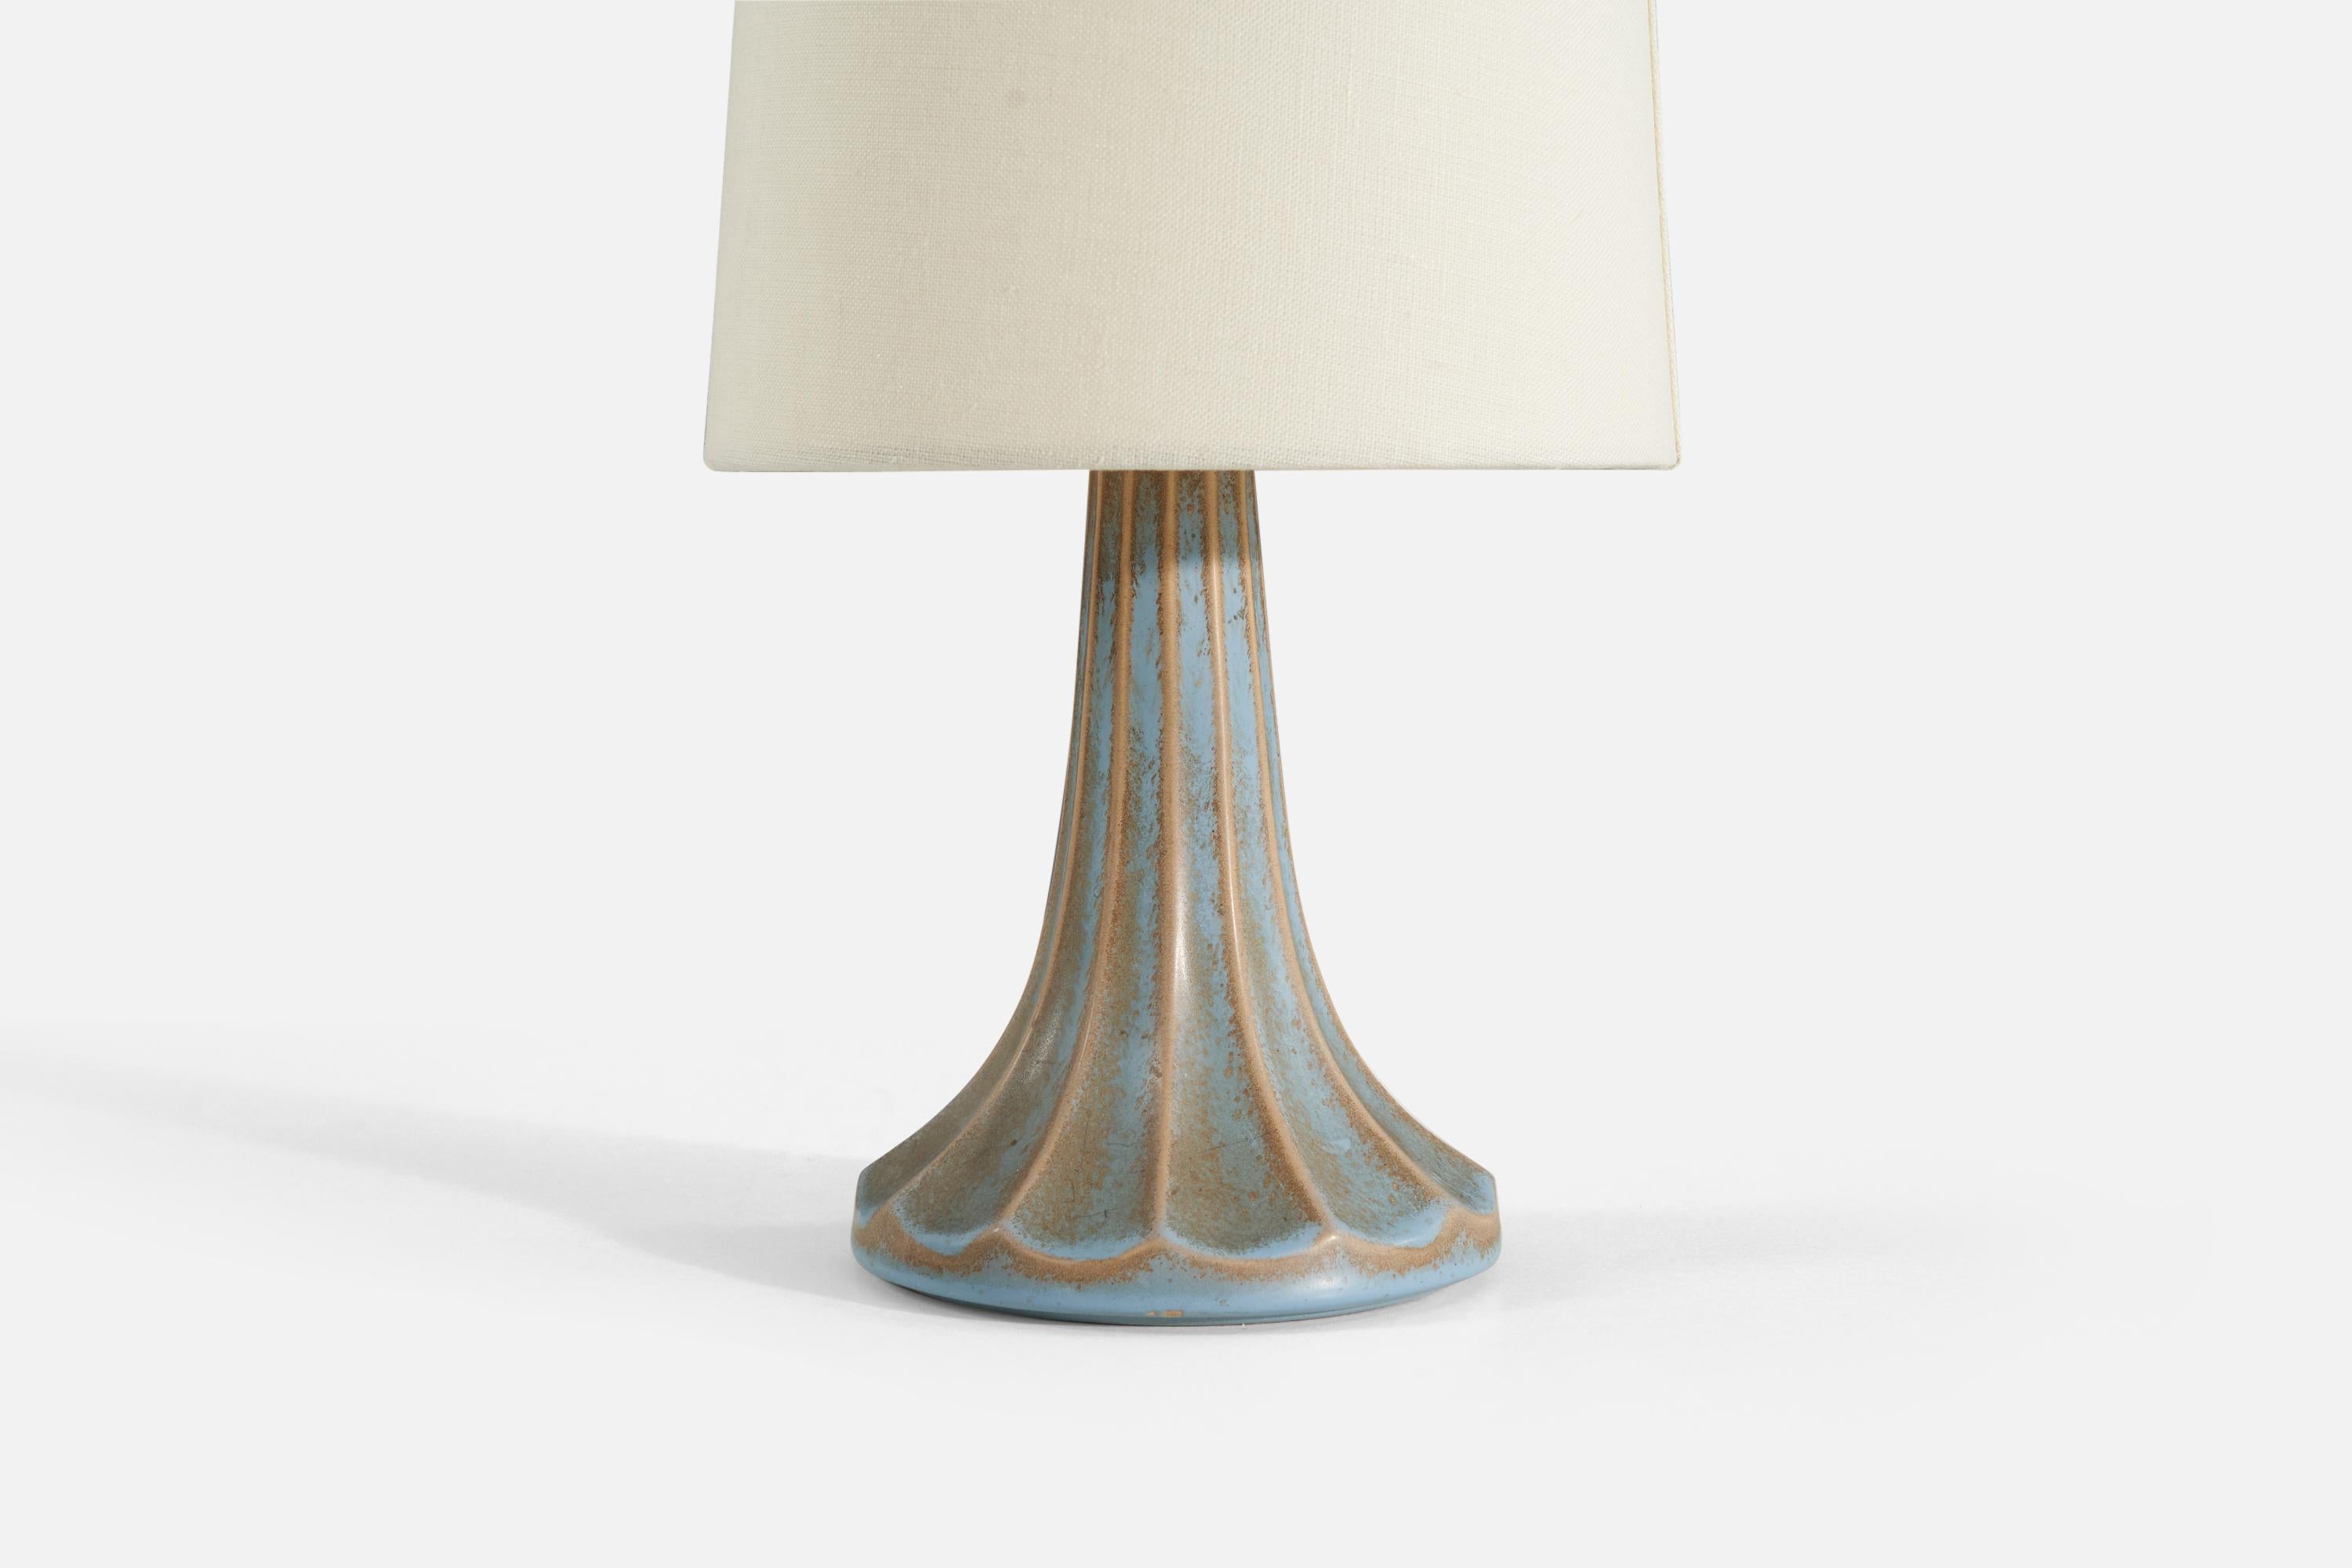  Ewald Dahlskog, Fluted Table Lamp, Blue-Glazed Earthenware, Sweden, 1940s In Good Condition For Sale In High Point, NC